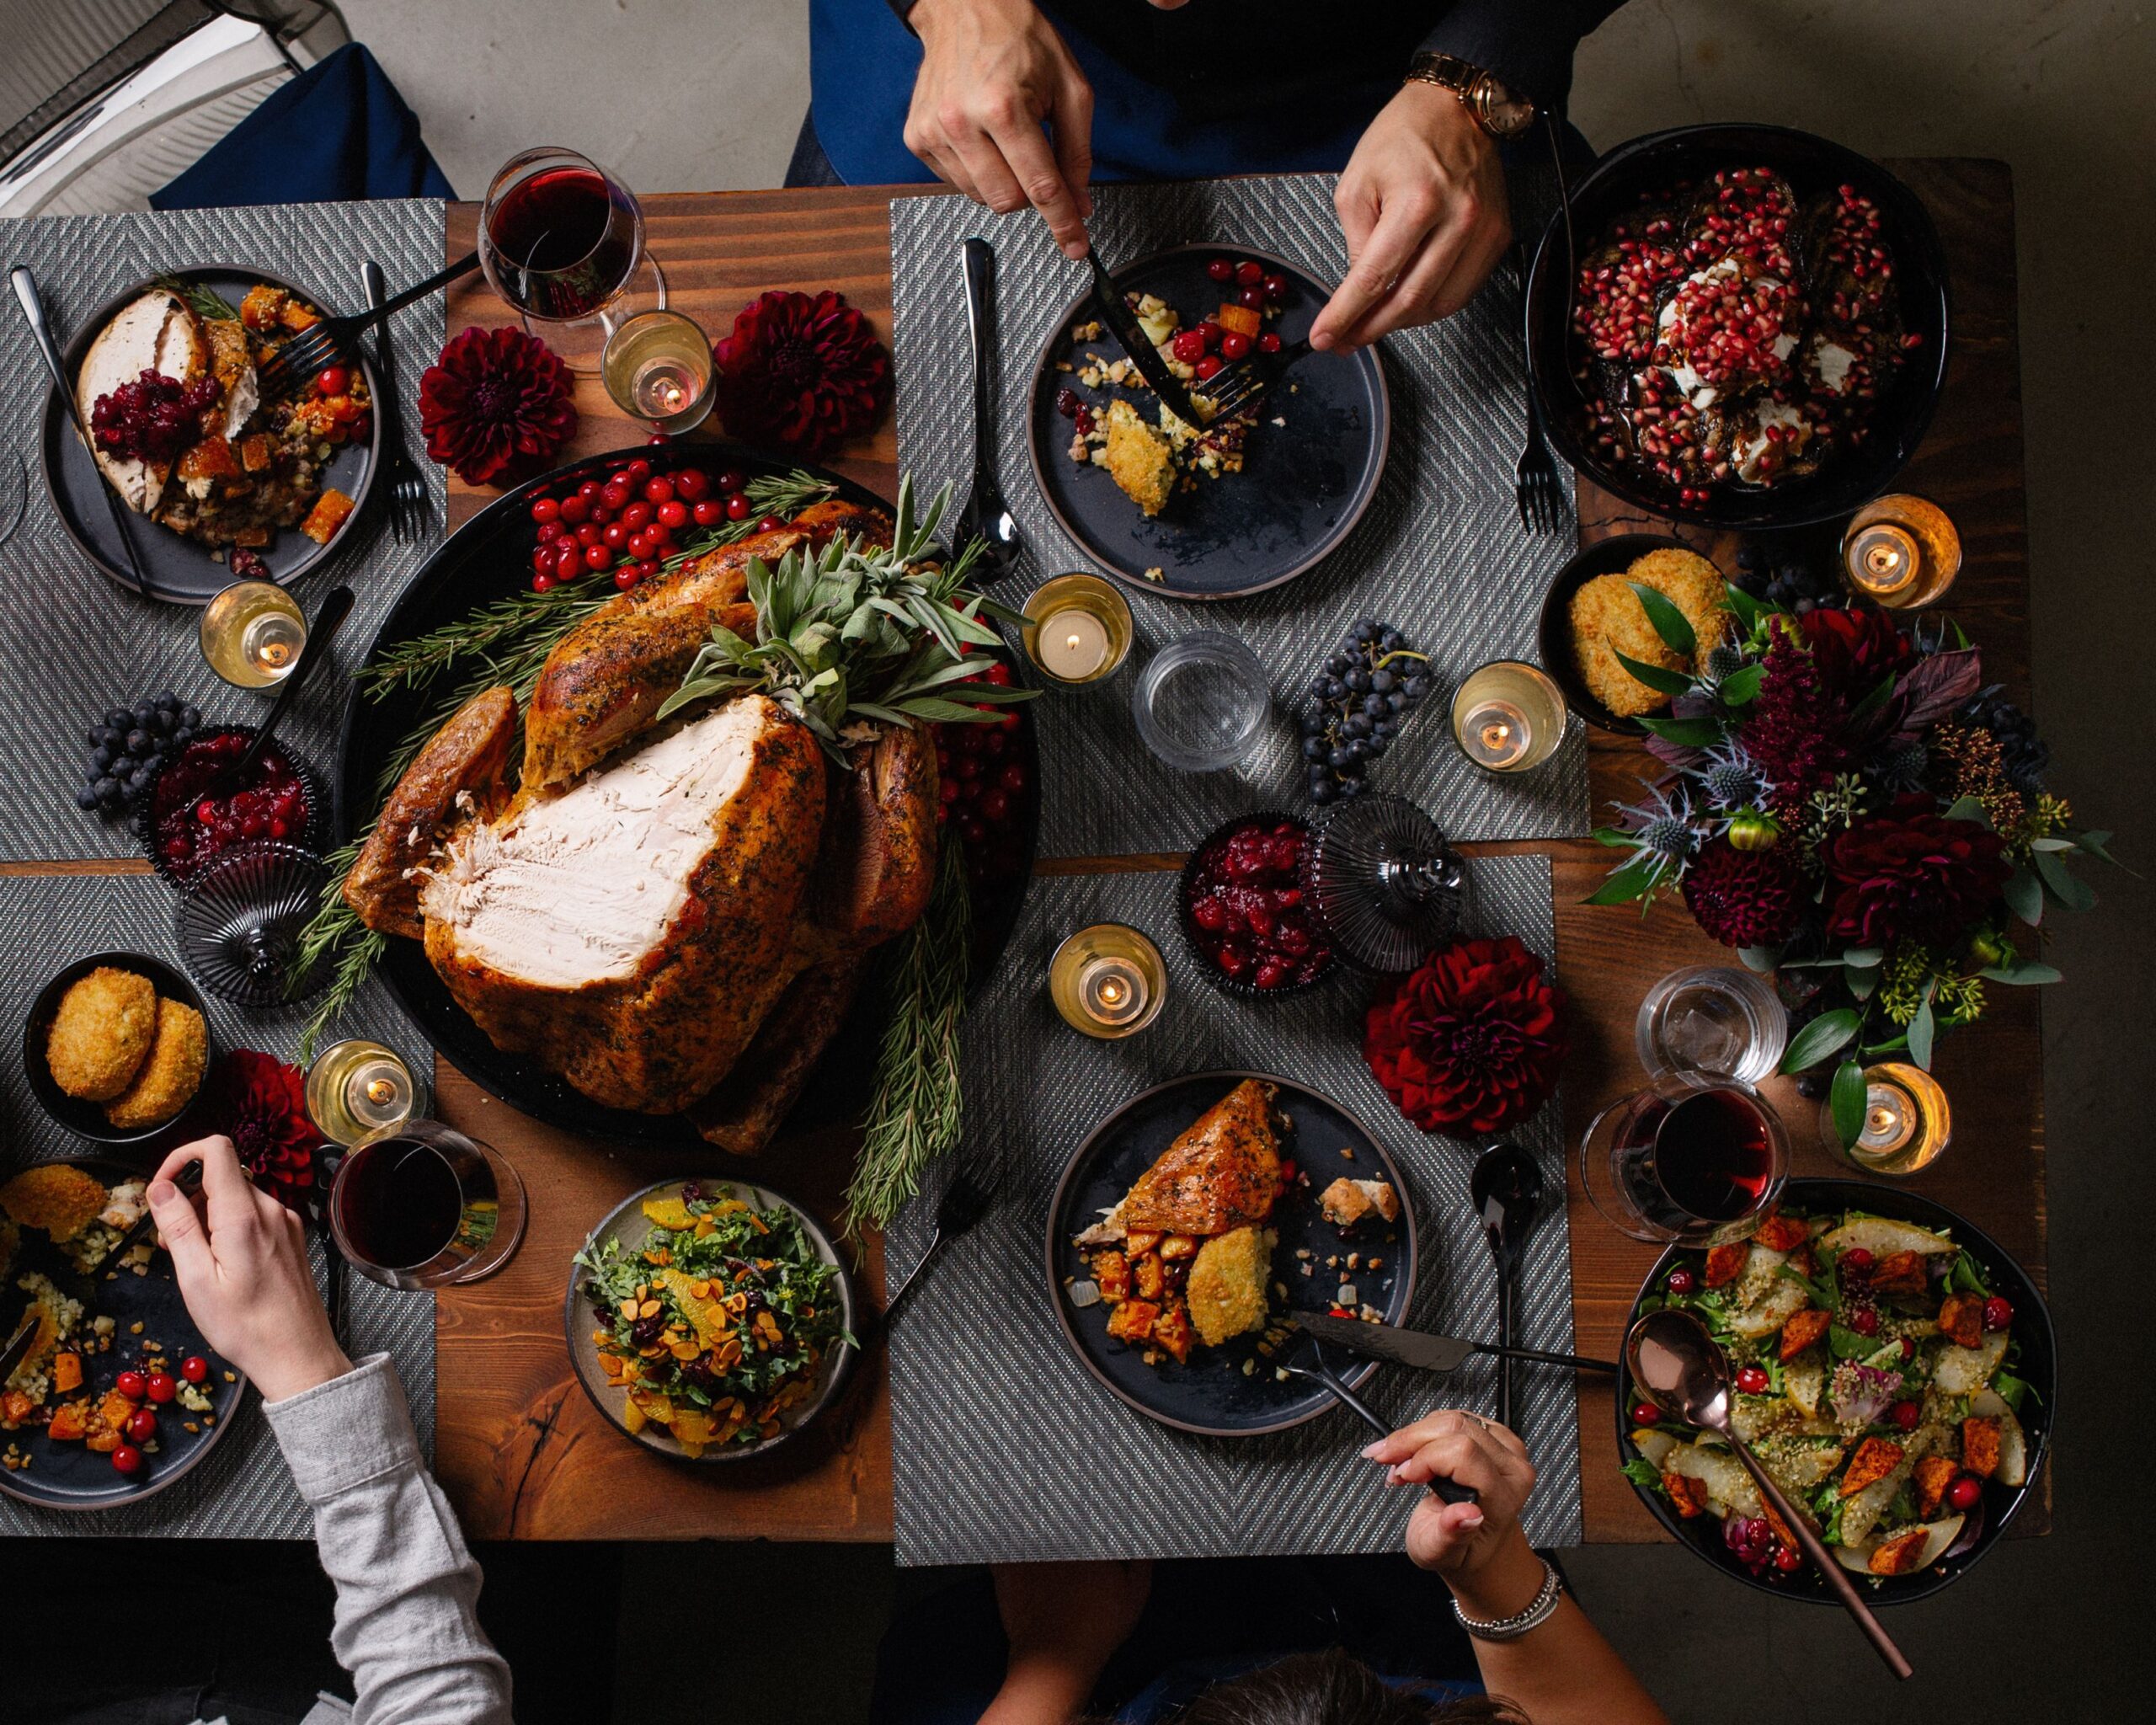 6 Vancouver Catering Companies to Feed Your Holiday Party